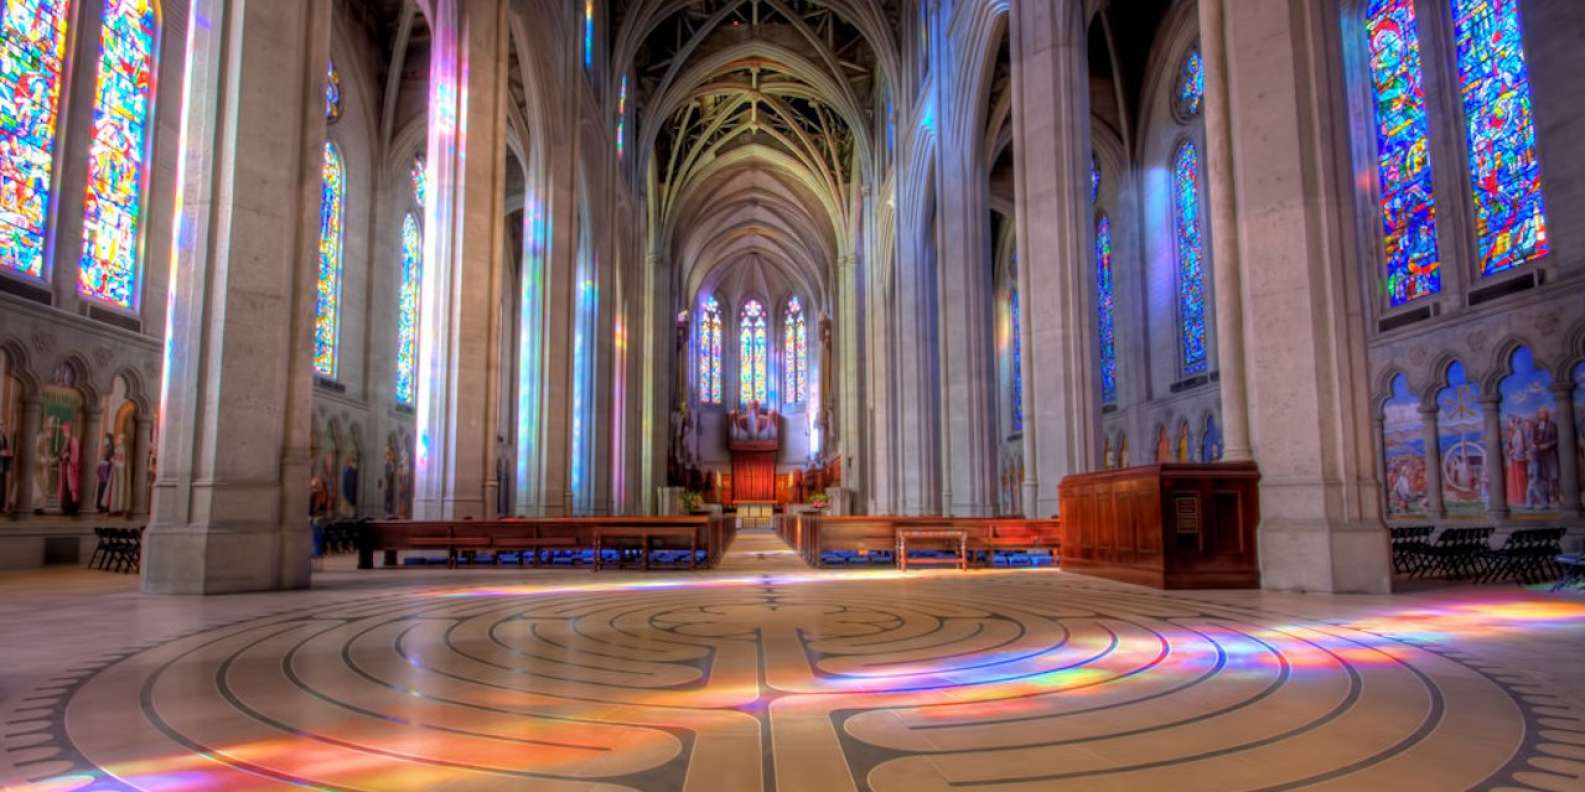 TOP 10 BEST Stained Glass Supplies in San Francisco, CA - January